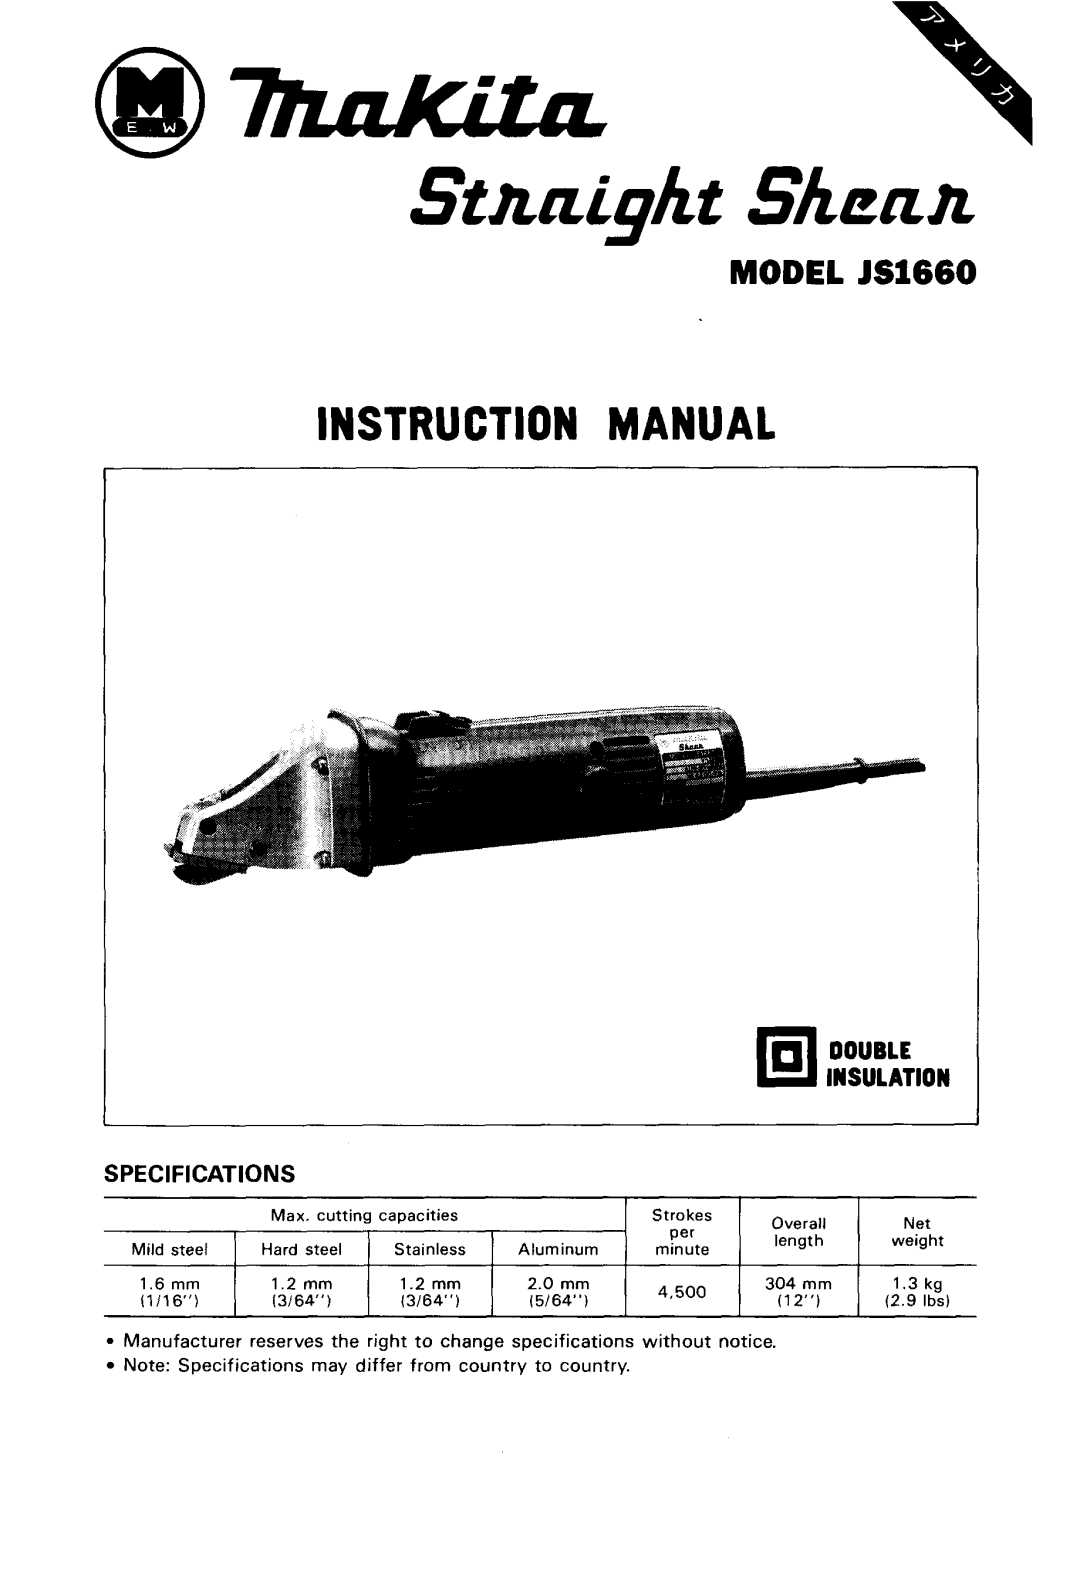 Makita instruction manual MODEL JS1660, Double, Specifications, Insulation 